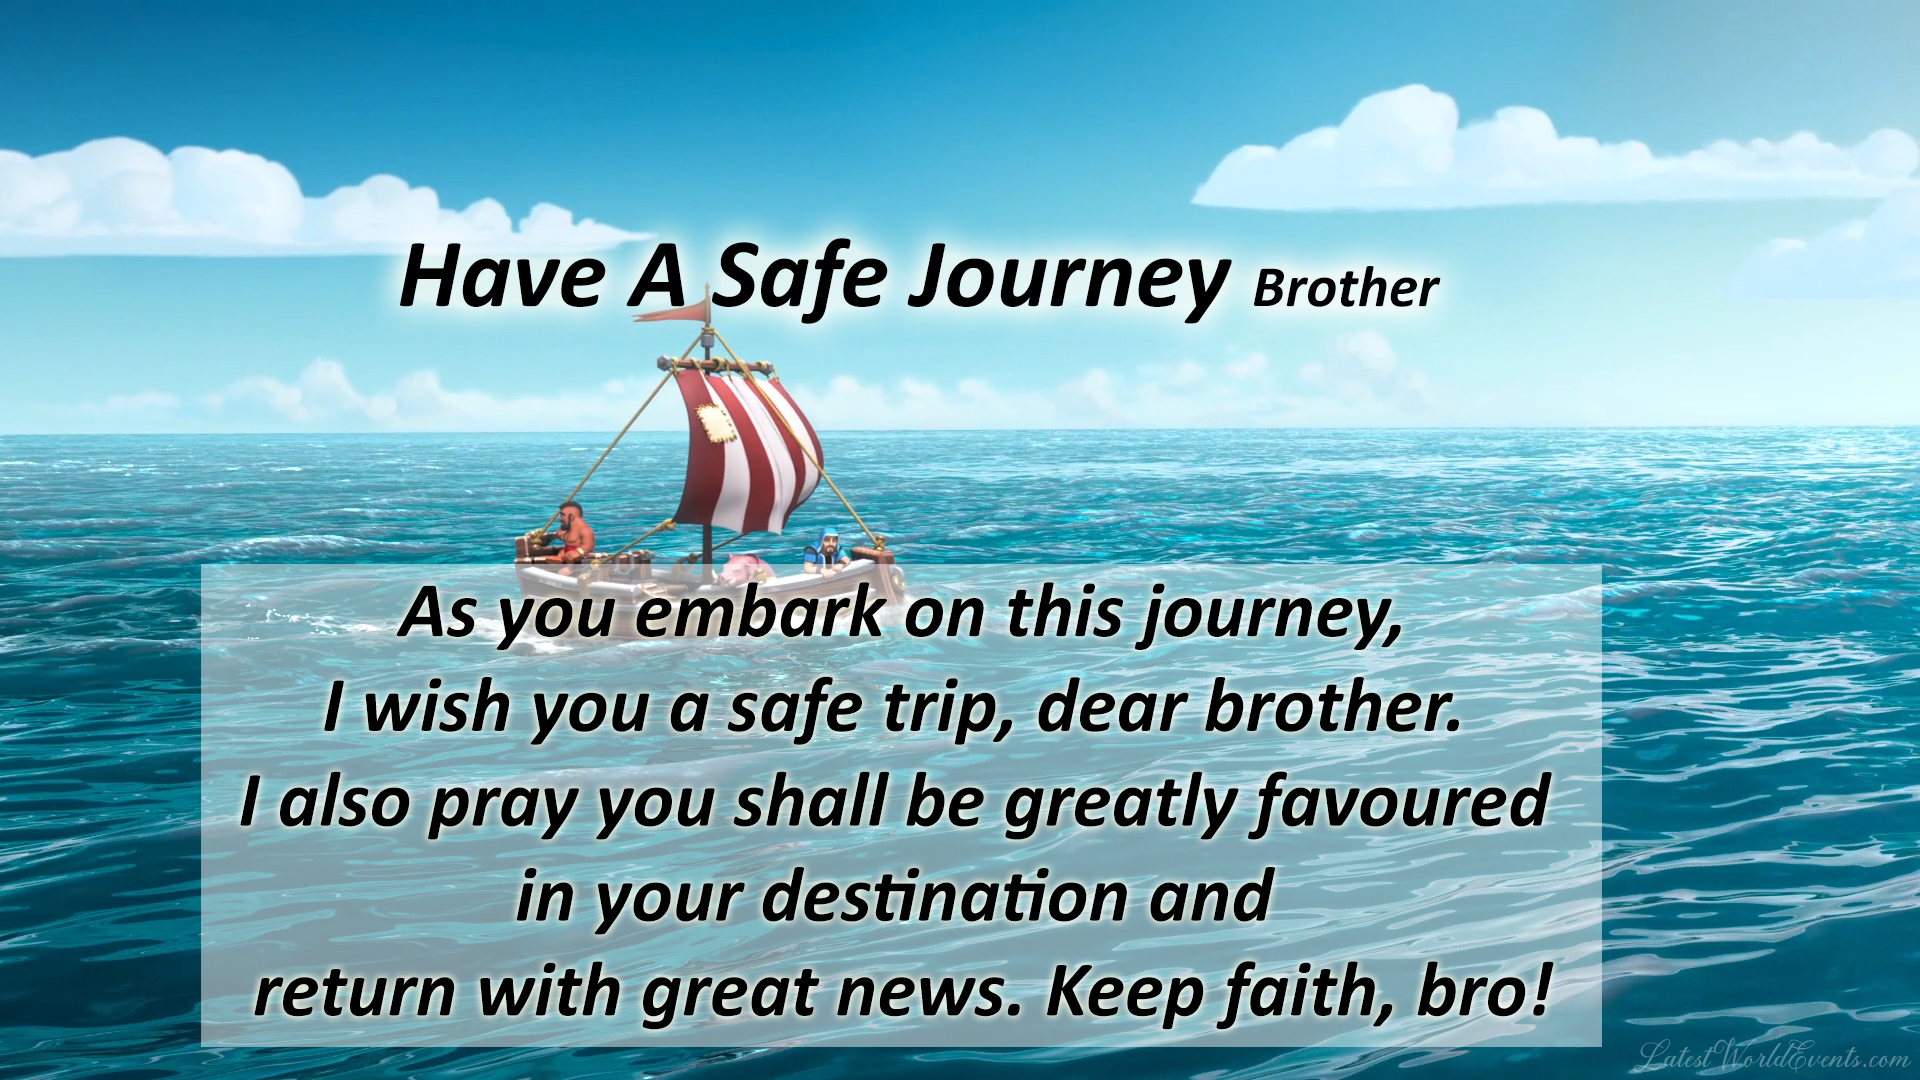 safe journey wishes in tamil